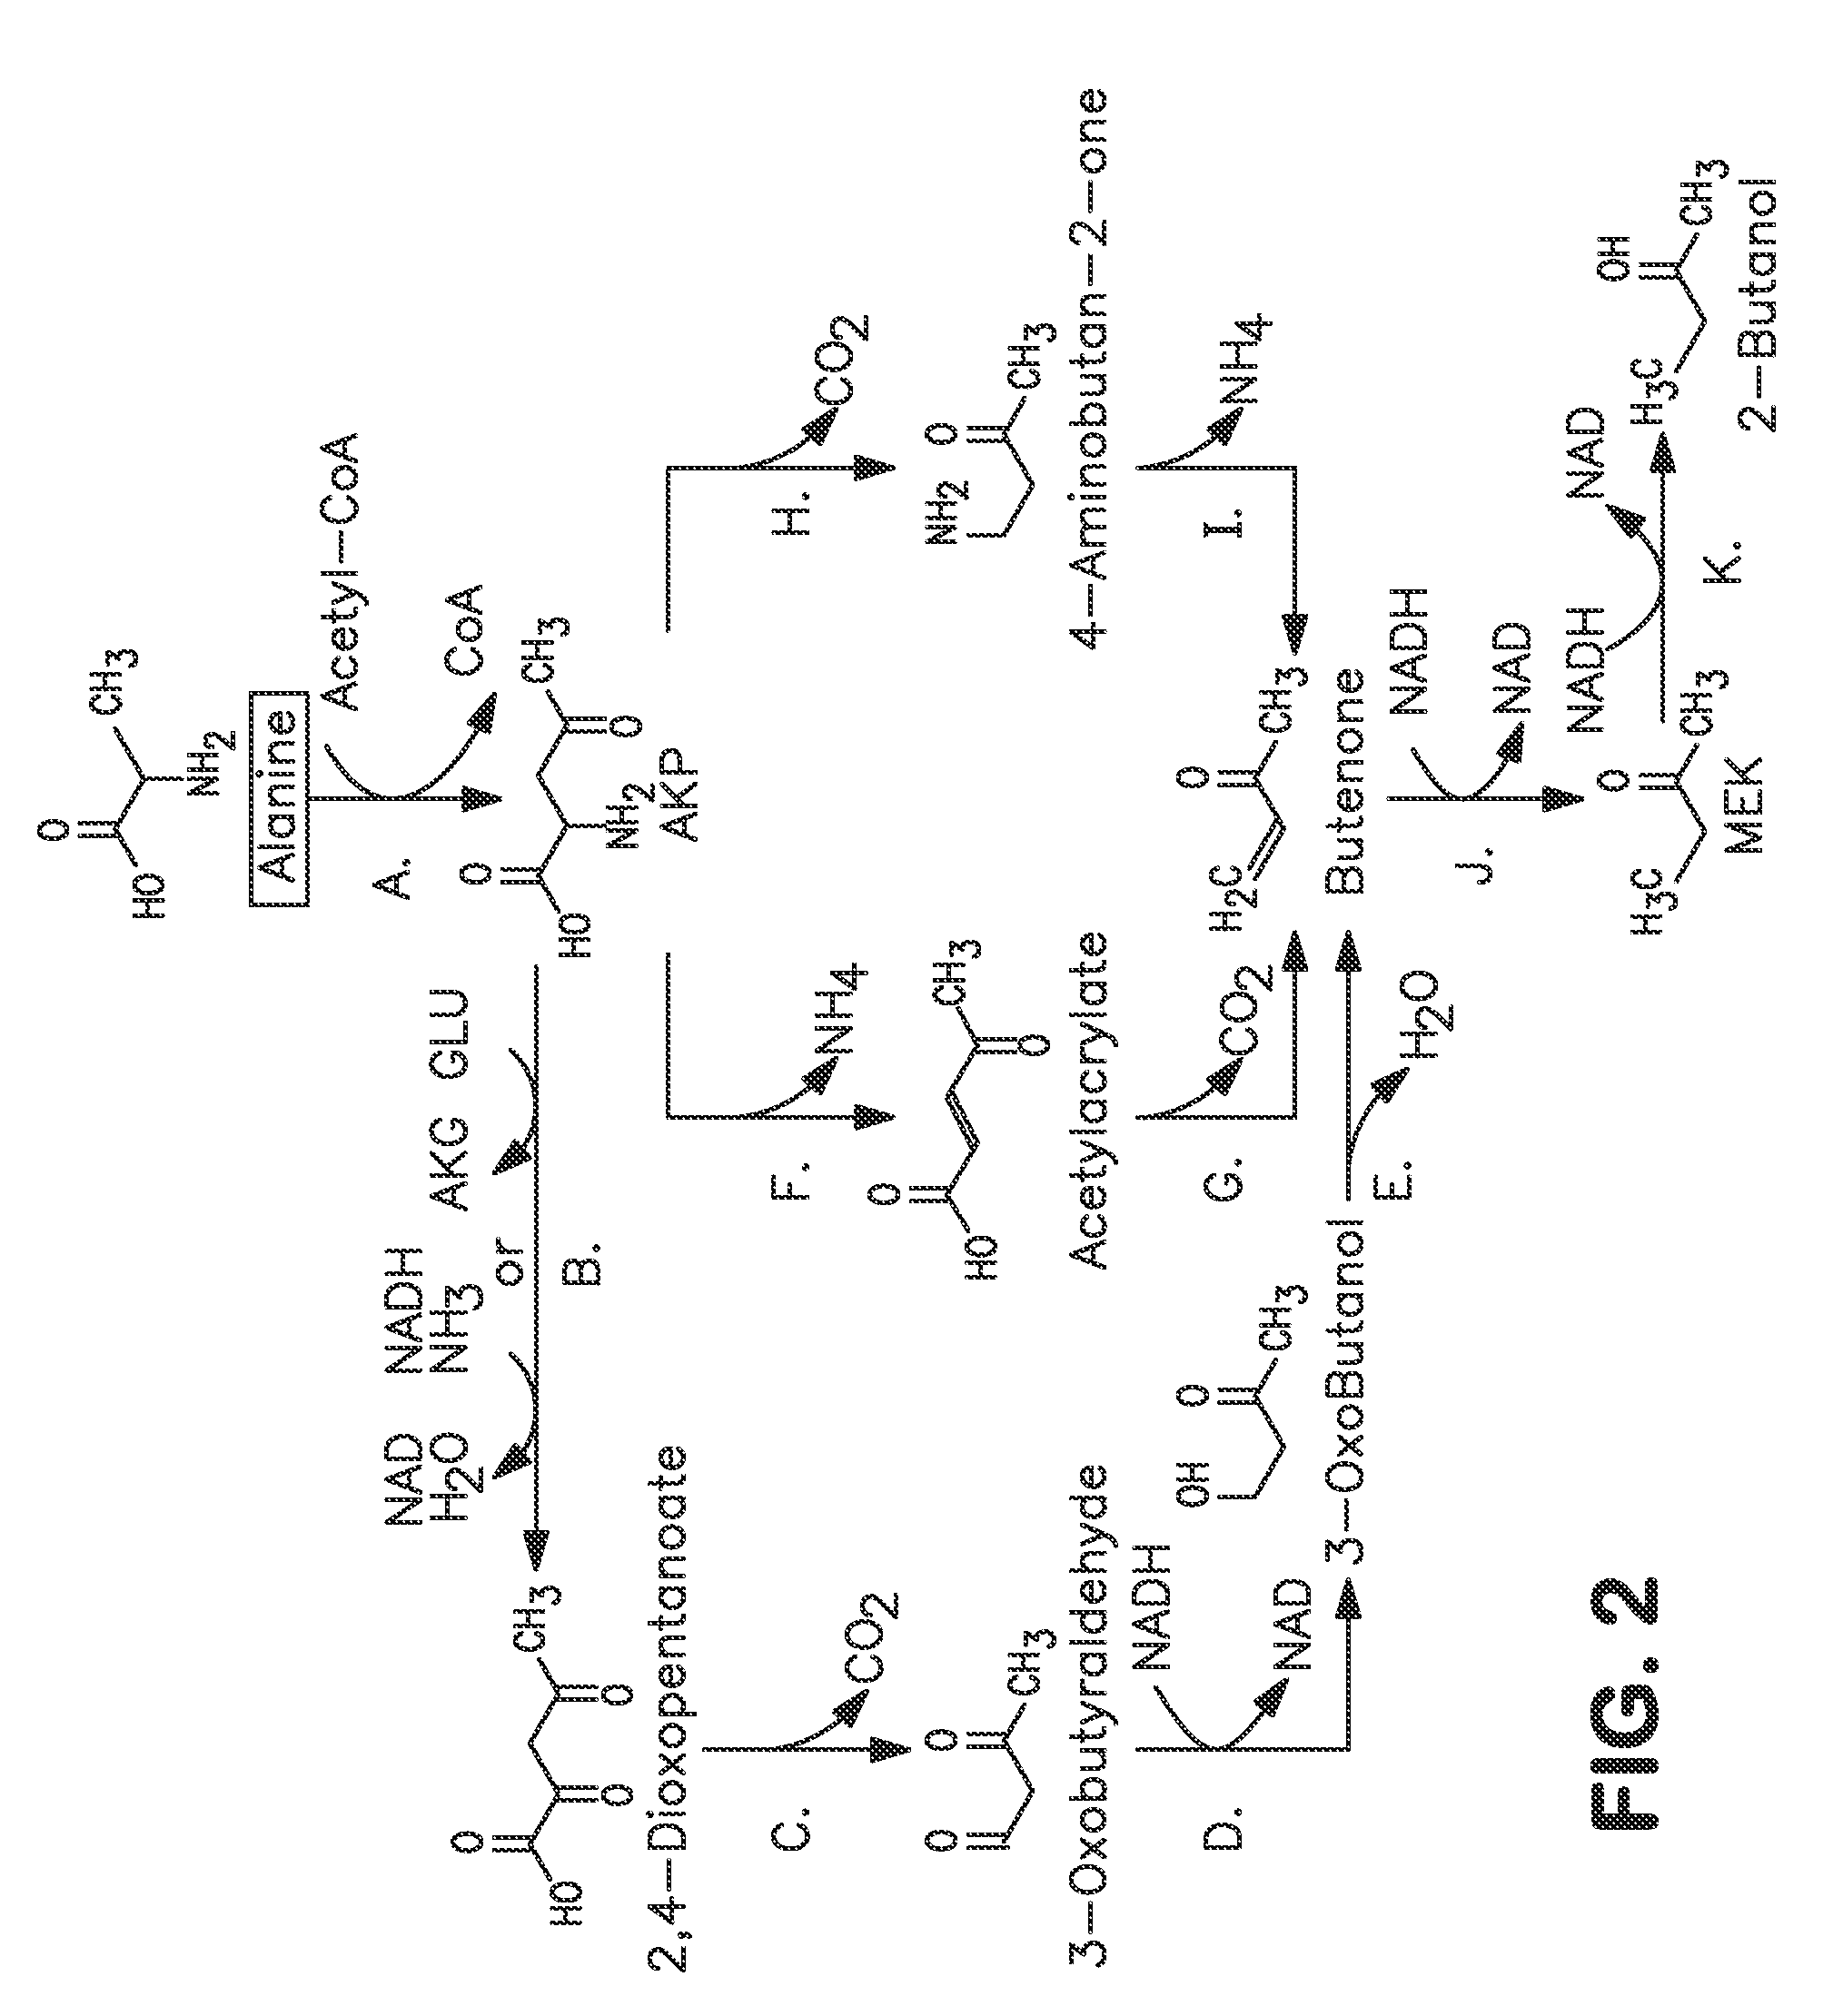 Microorganisms and methods for carbon-efficient biosynthesis of MEK and 2-butanol